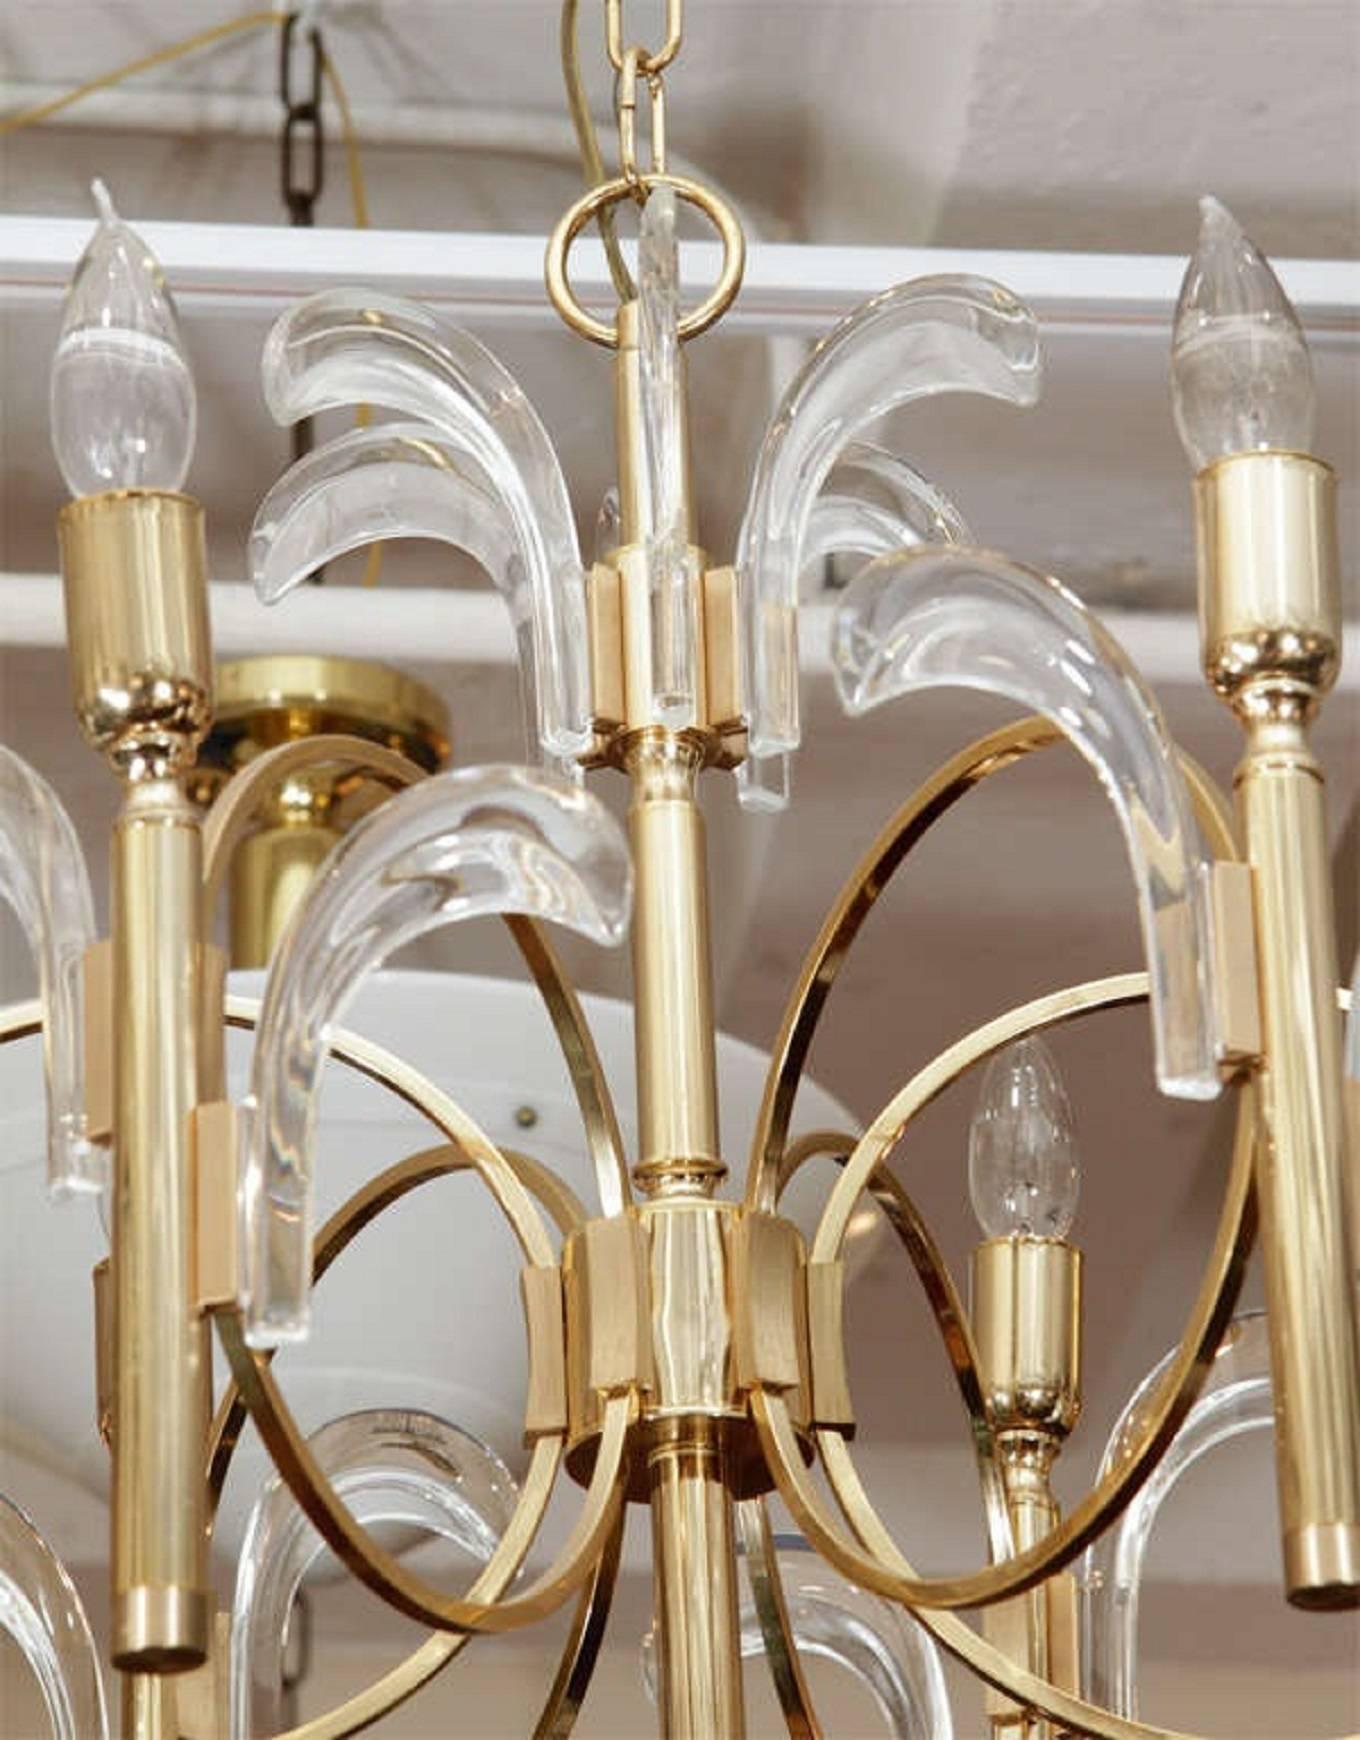 Spectacular Brass and Glass Chandelier by Gaetano Sciolari In Good Condition For Sale In Mount Penn, PA